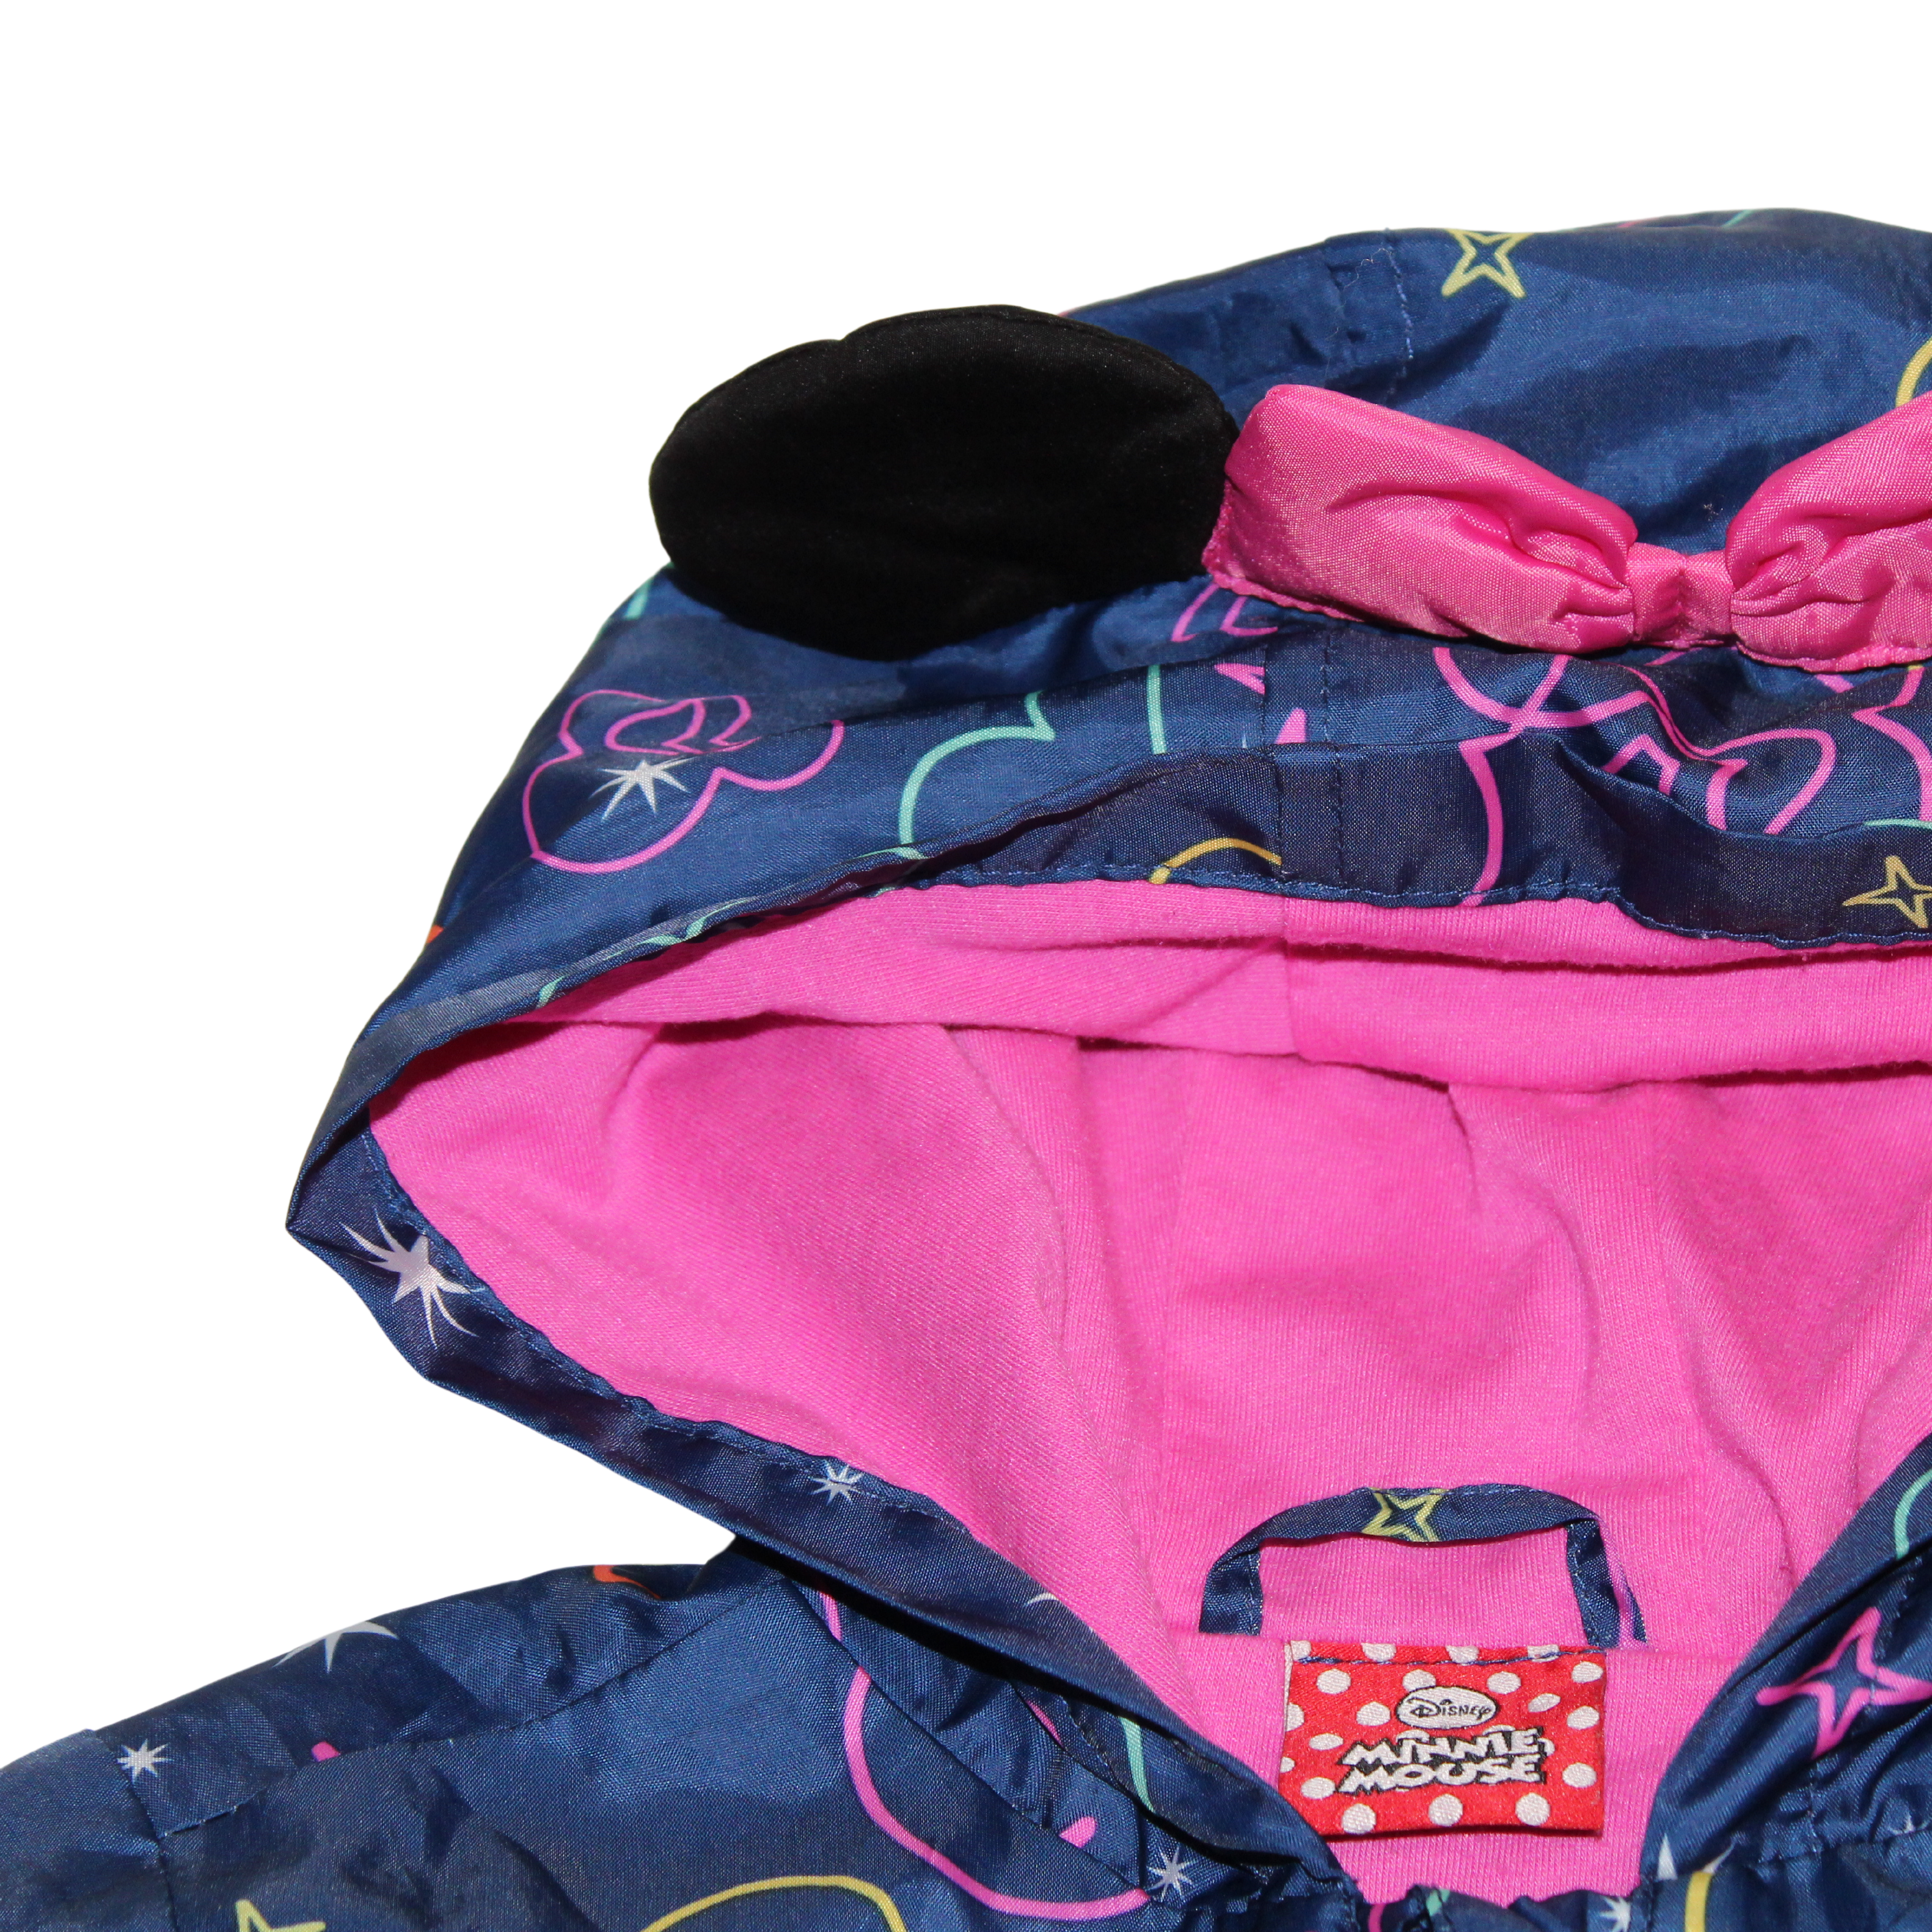 Shower Proof Minnie Mouse Jacket